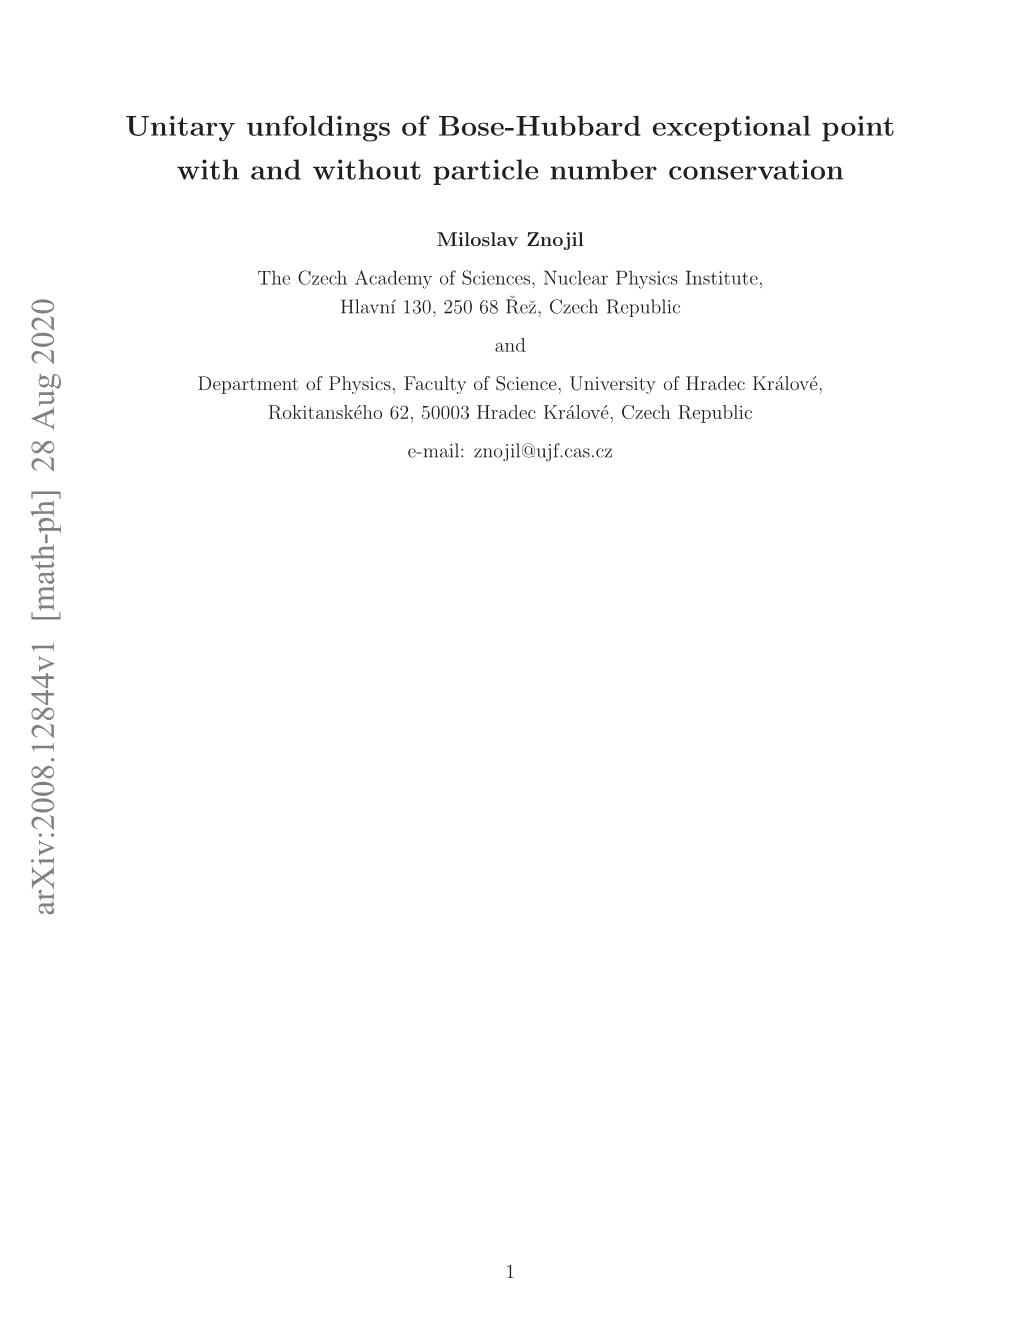 Unitary Unfoldings of Bose-Hubbard Exceptional Point with and Without Particle Number Conservation